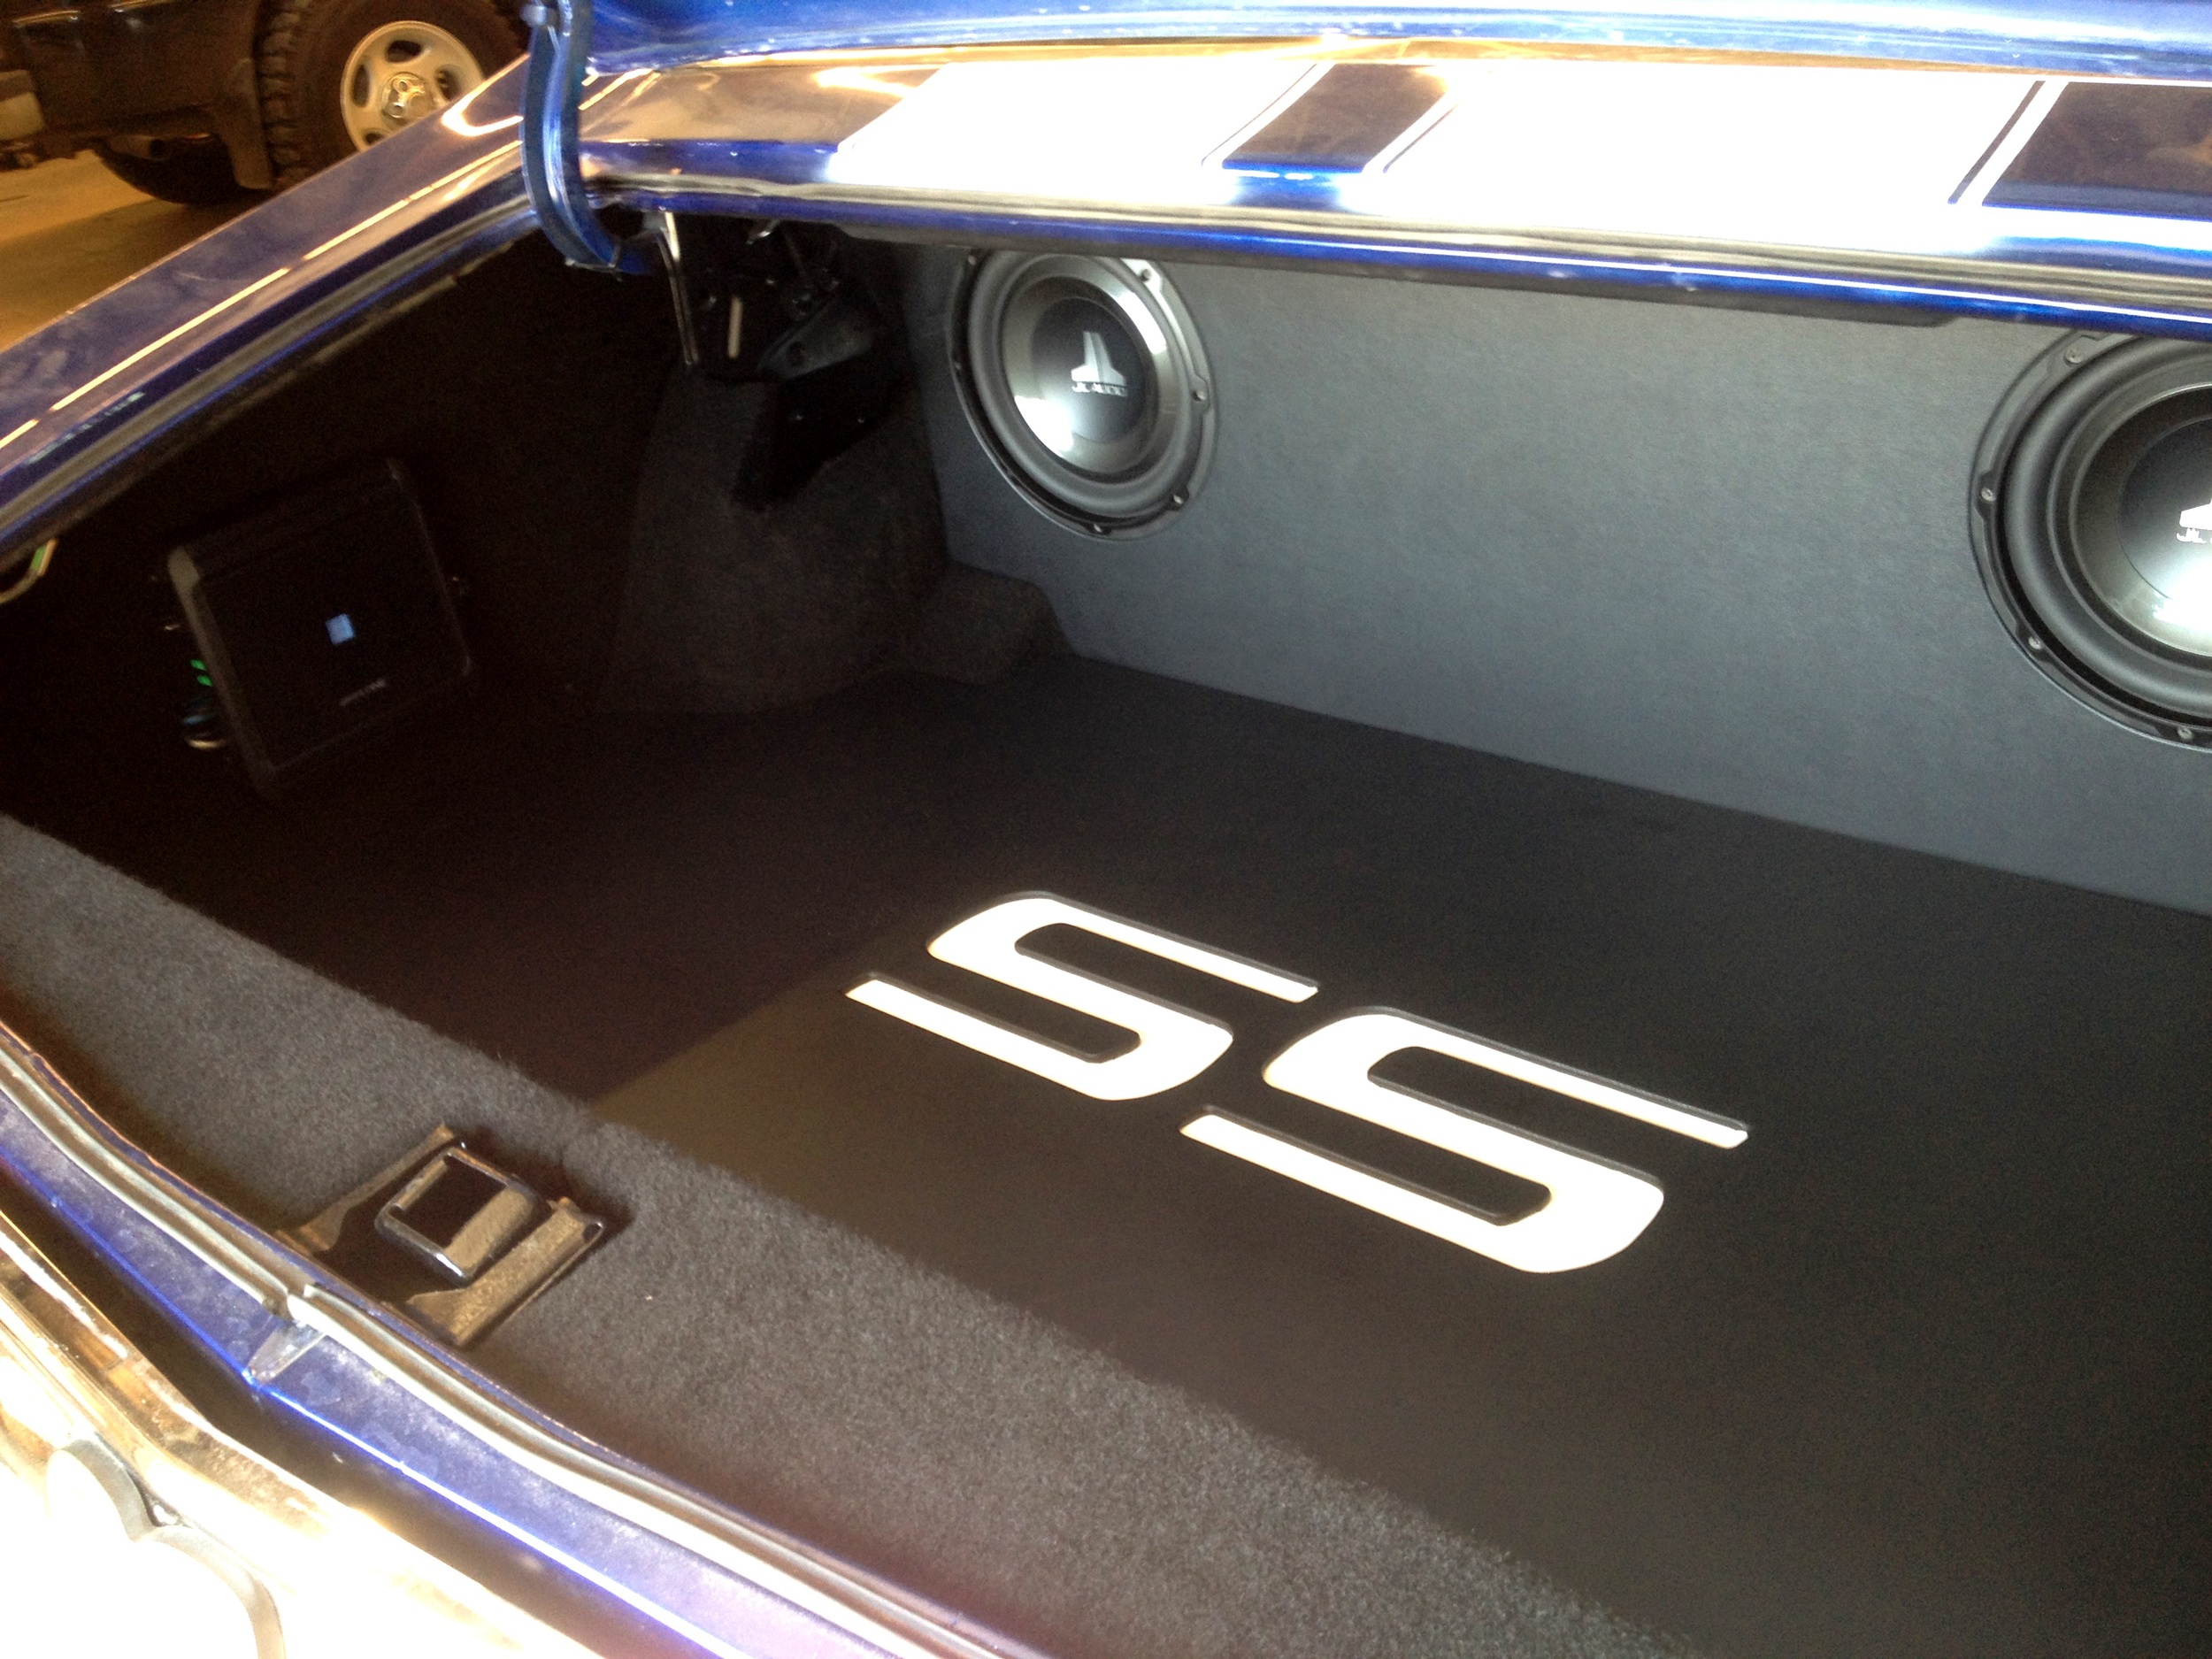 1972 Chevelle - Custom Trunk Finish with Subwoofer Enclosure